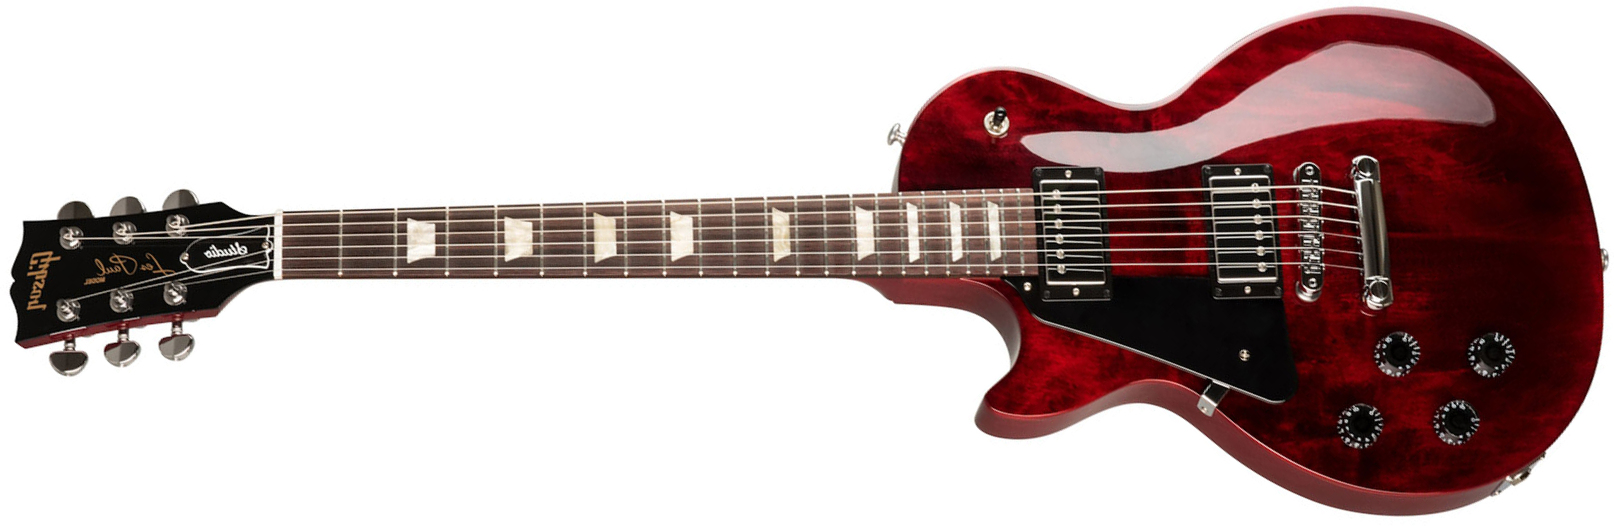 Gibson Les Paul Studio Modern 2020 Lh Gaucher 2h Ht Rw - Wine Red - Left-handed electric guitar - Main picture